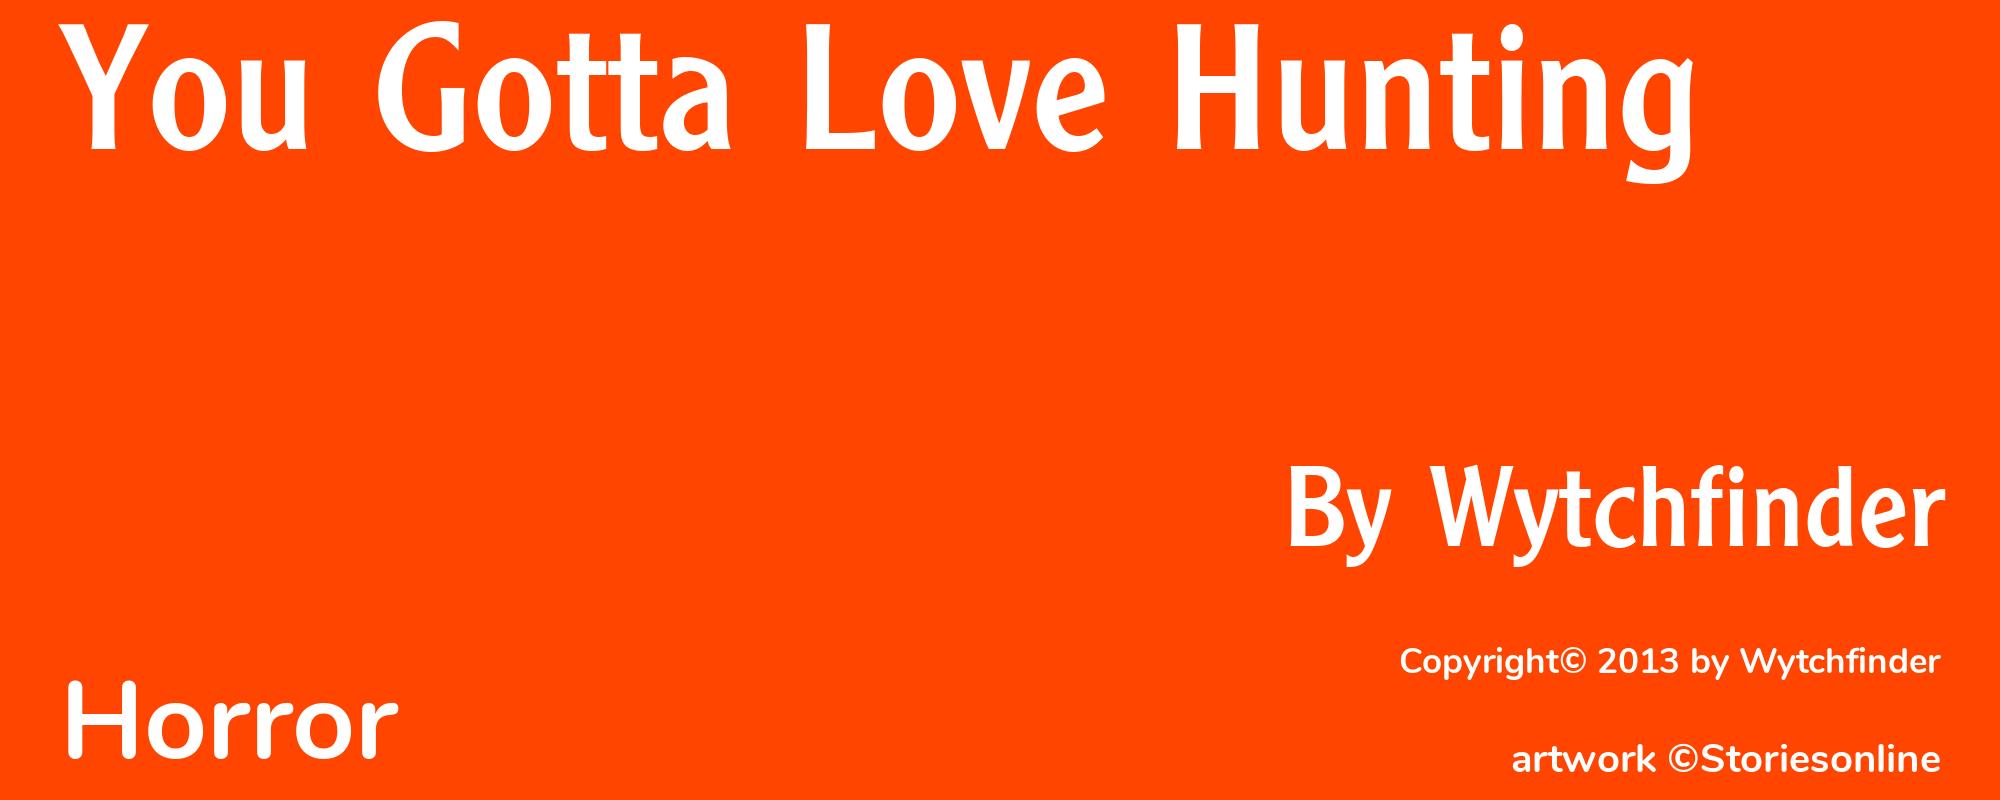 You Gotta Love Hunting - Cover